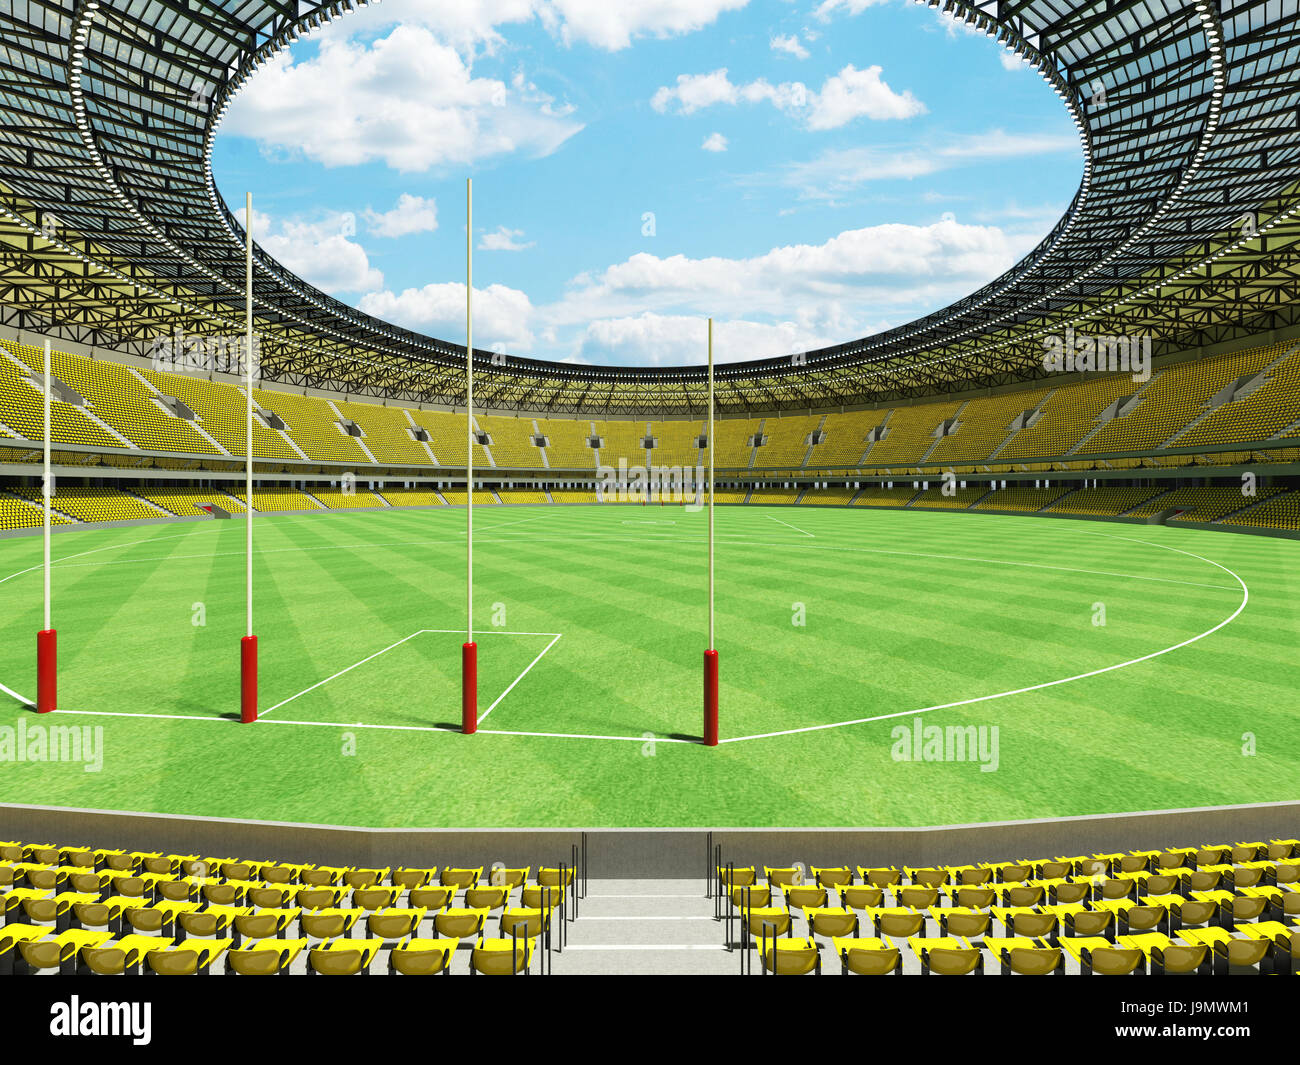 3D render of a round Australian rules football stadium with  yellow seats and VIP boxes for fifty thousand fans Stock Photo